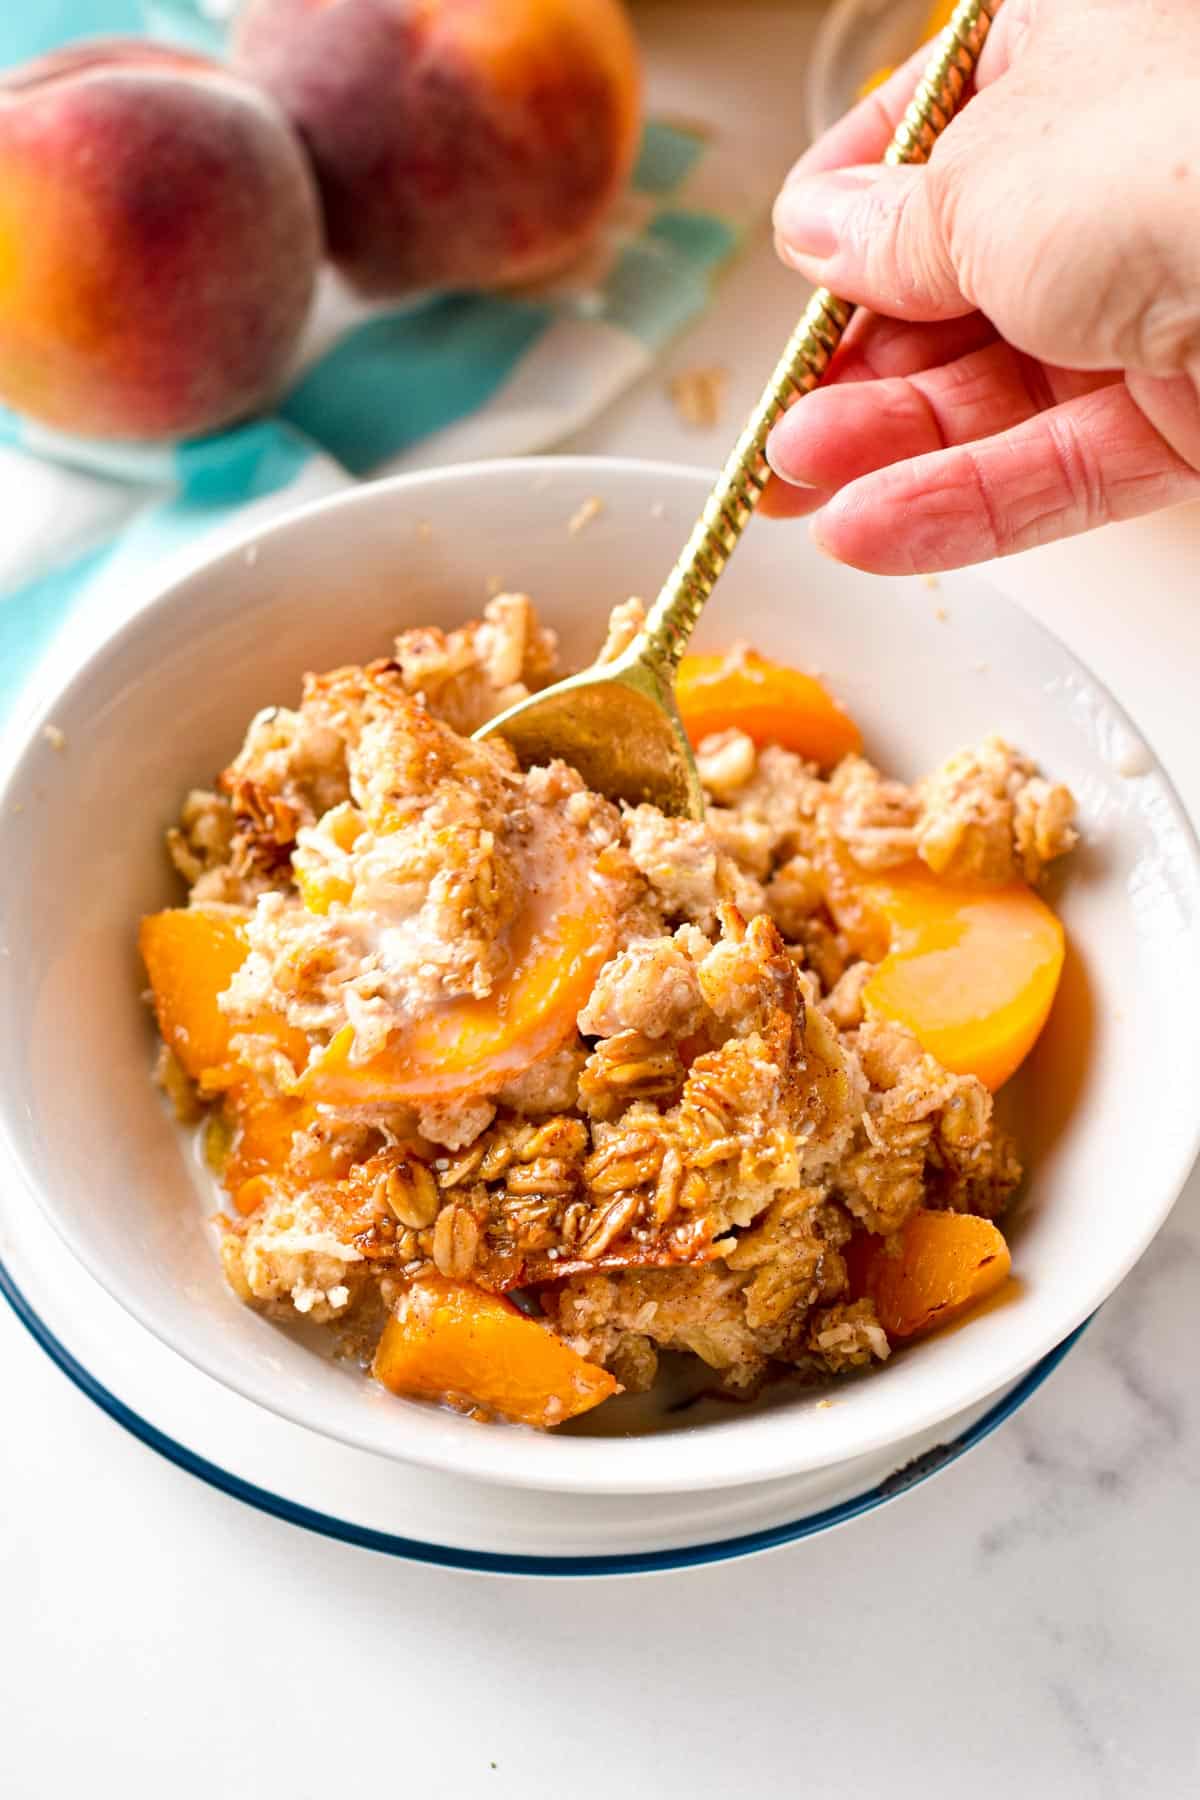 This Peach Baked Oatmeal isa creamy large batch of baked oatmeal filled with juicy peach. The perfect healthy family summer breakfast to use all your peaches this summer.